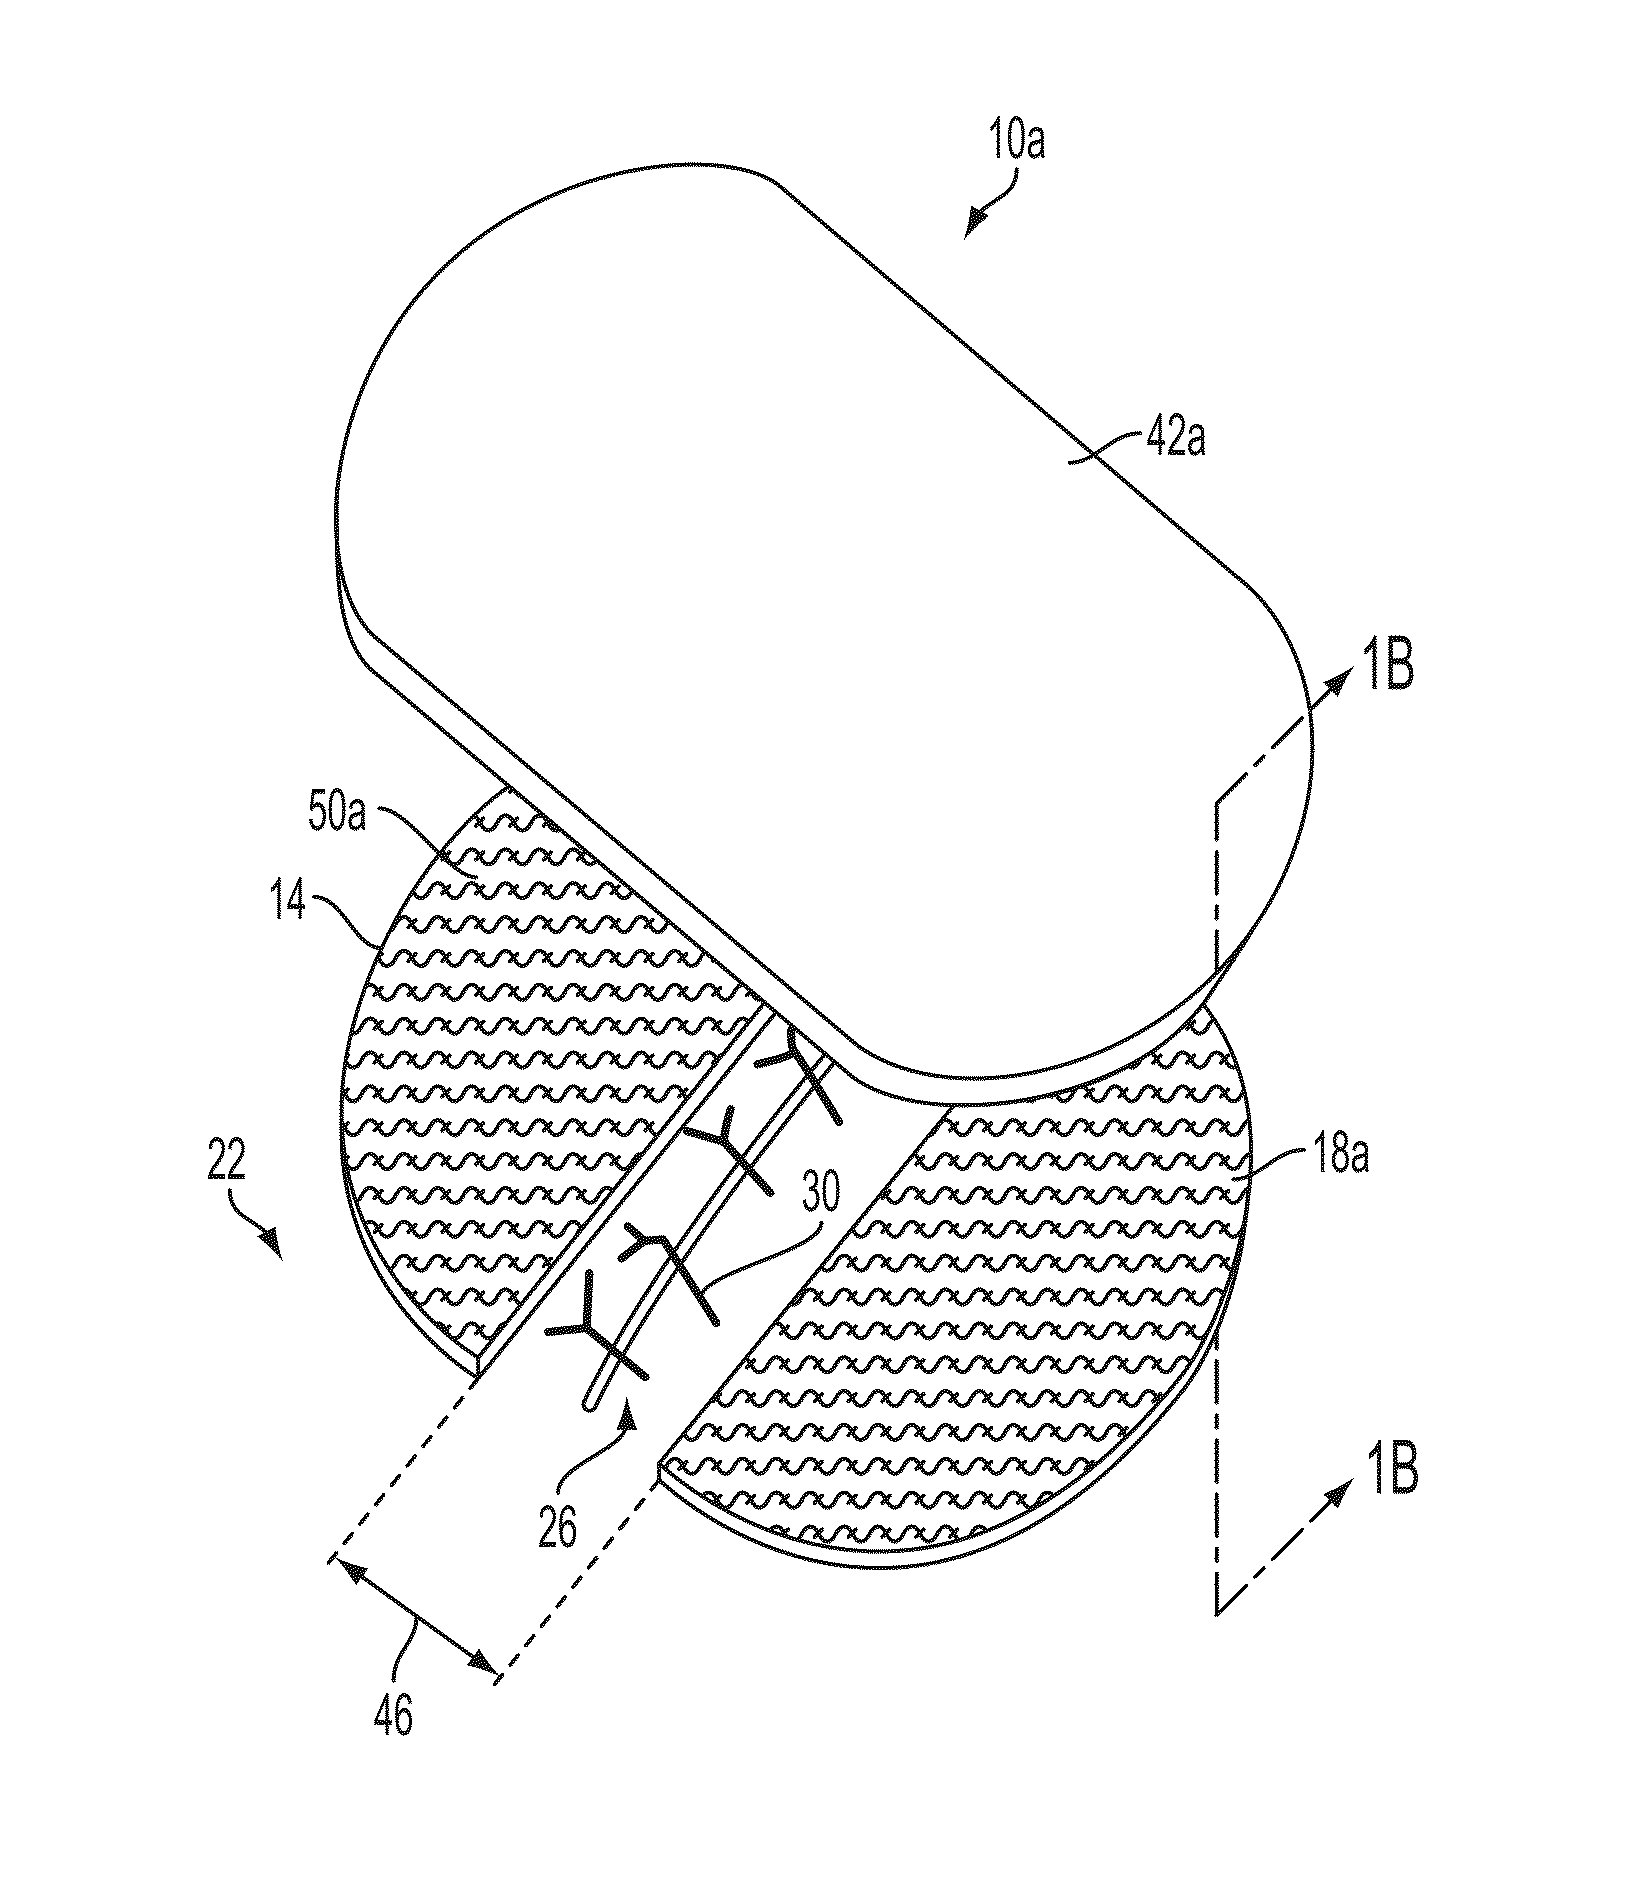 Apparatuses and methods for minimizing wound dehiscence, scar spread, and/or the like